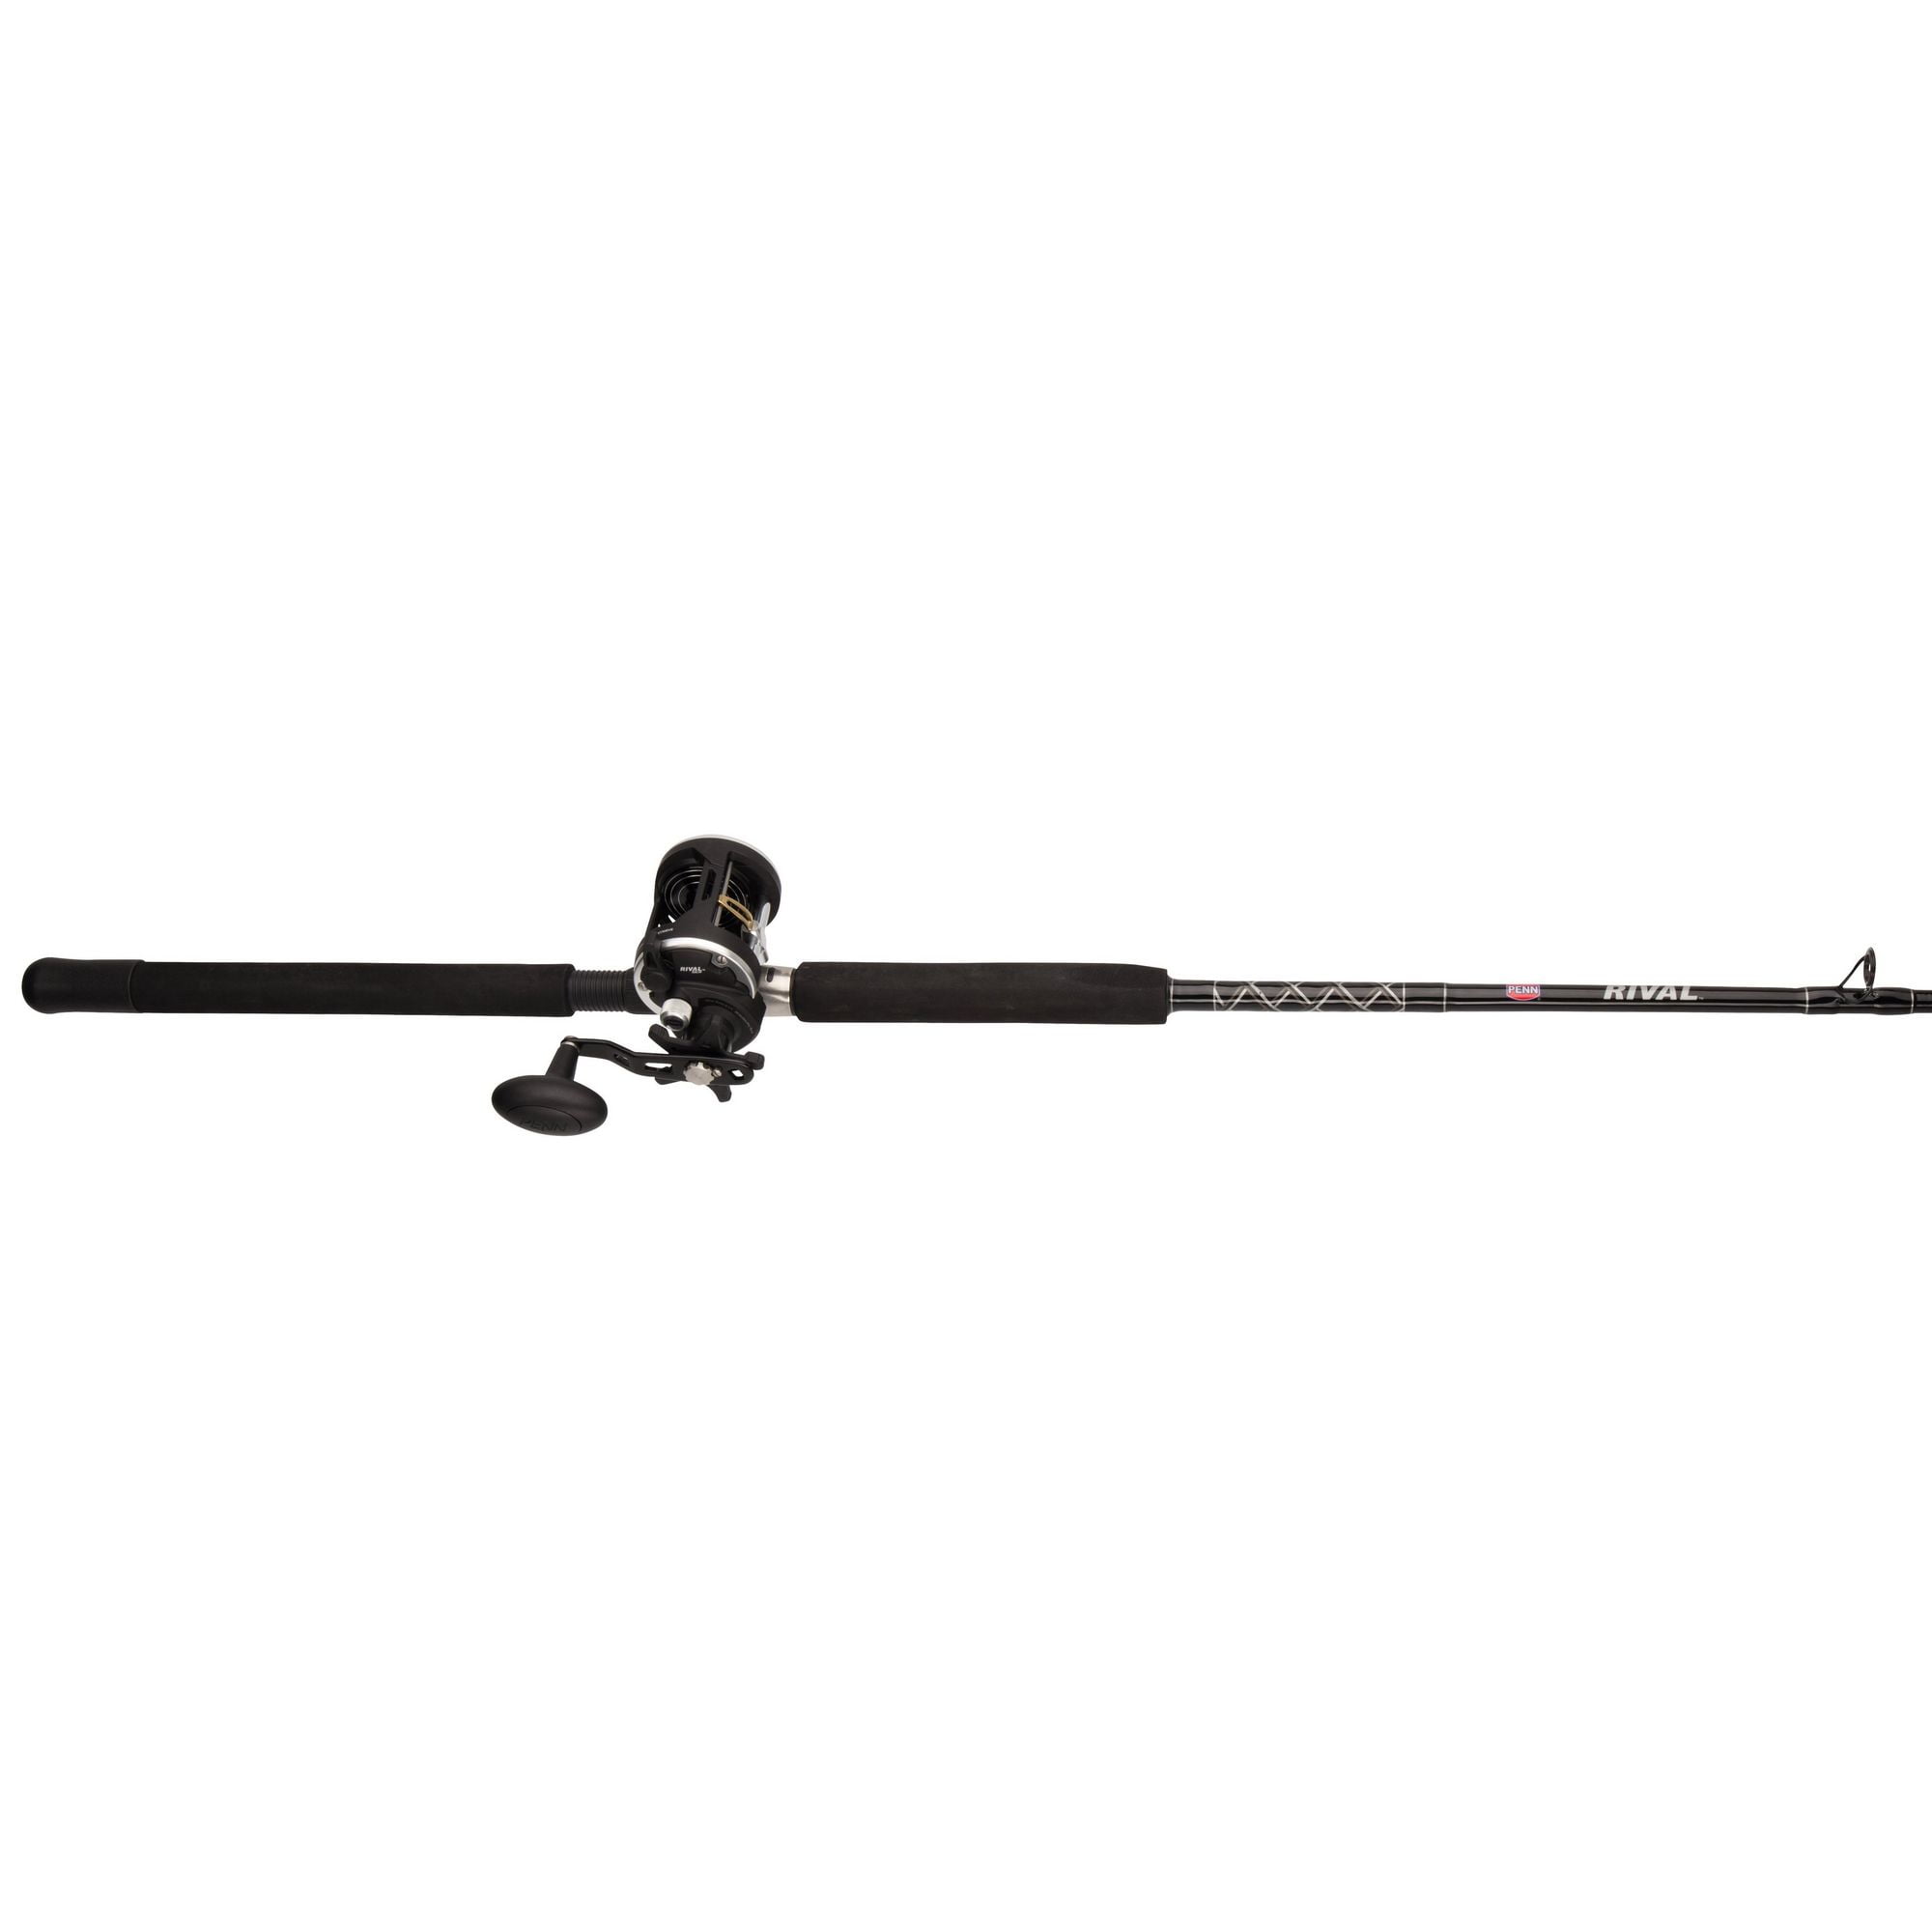 PENN 6'6” Rival Level Wind Fishing Rod and Reel Conventional